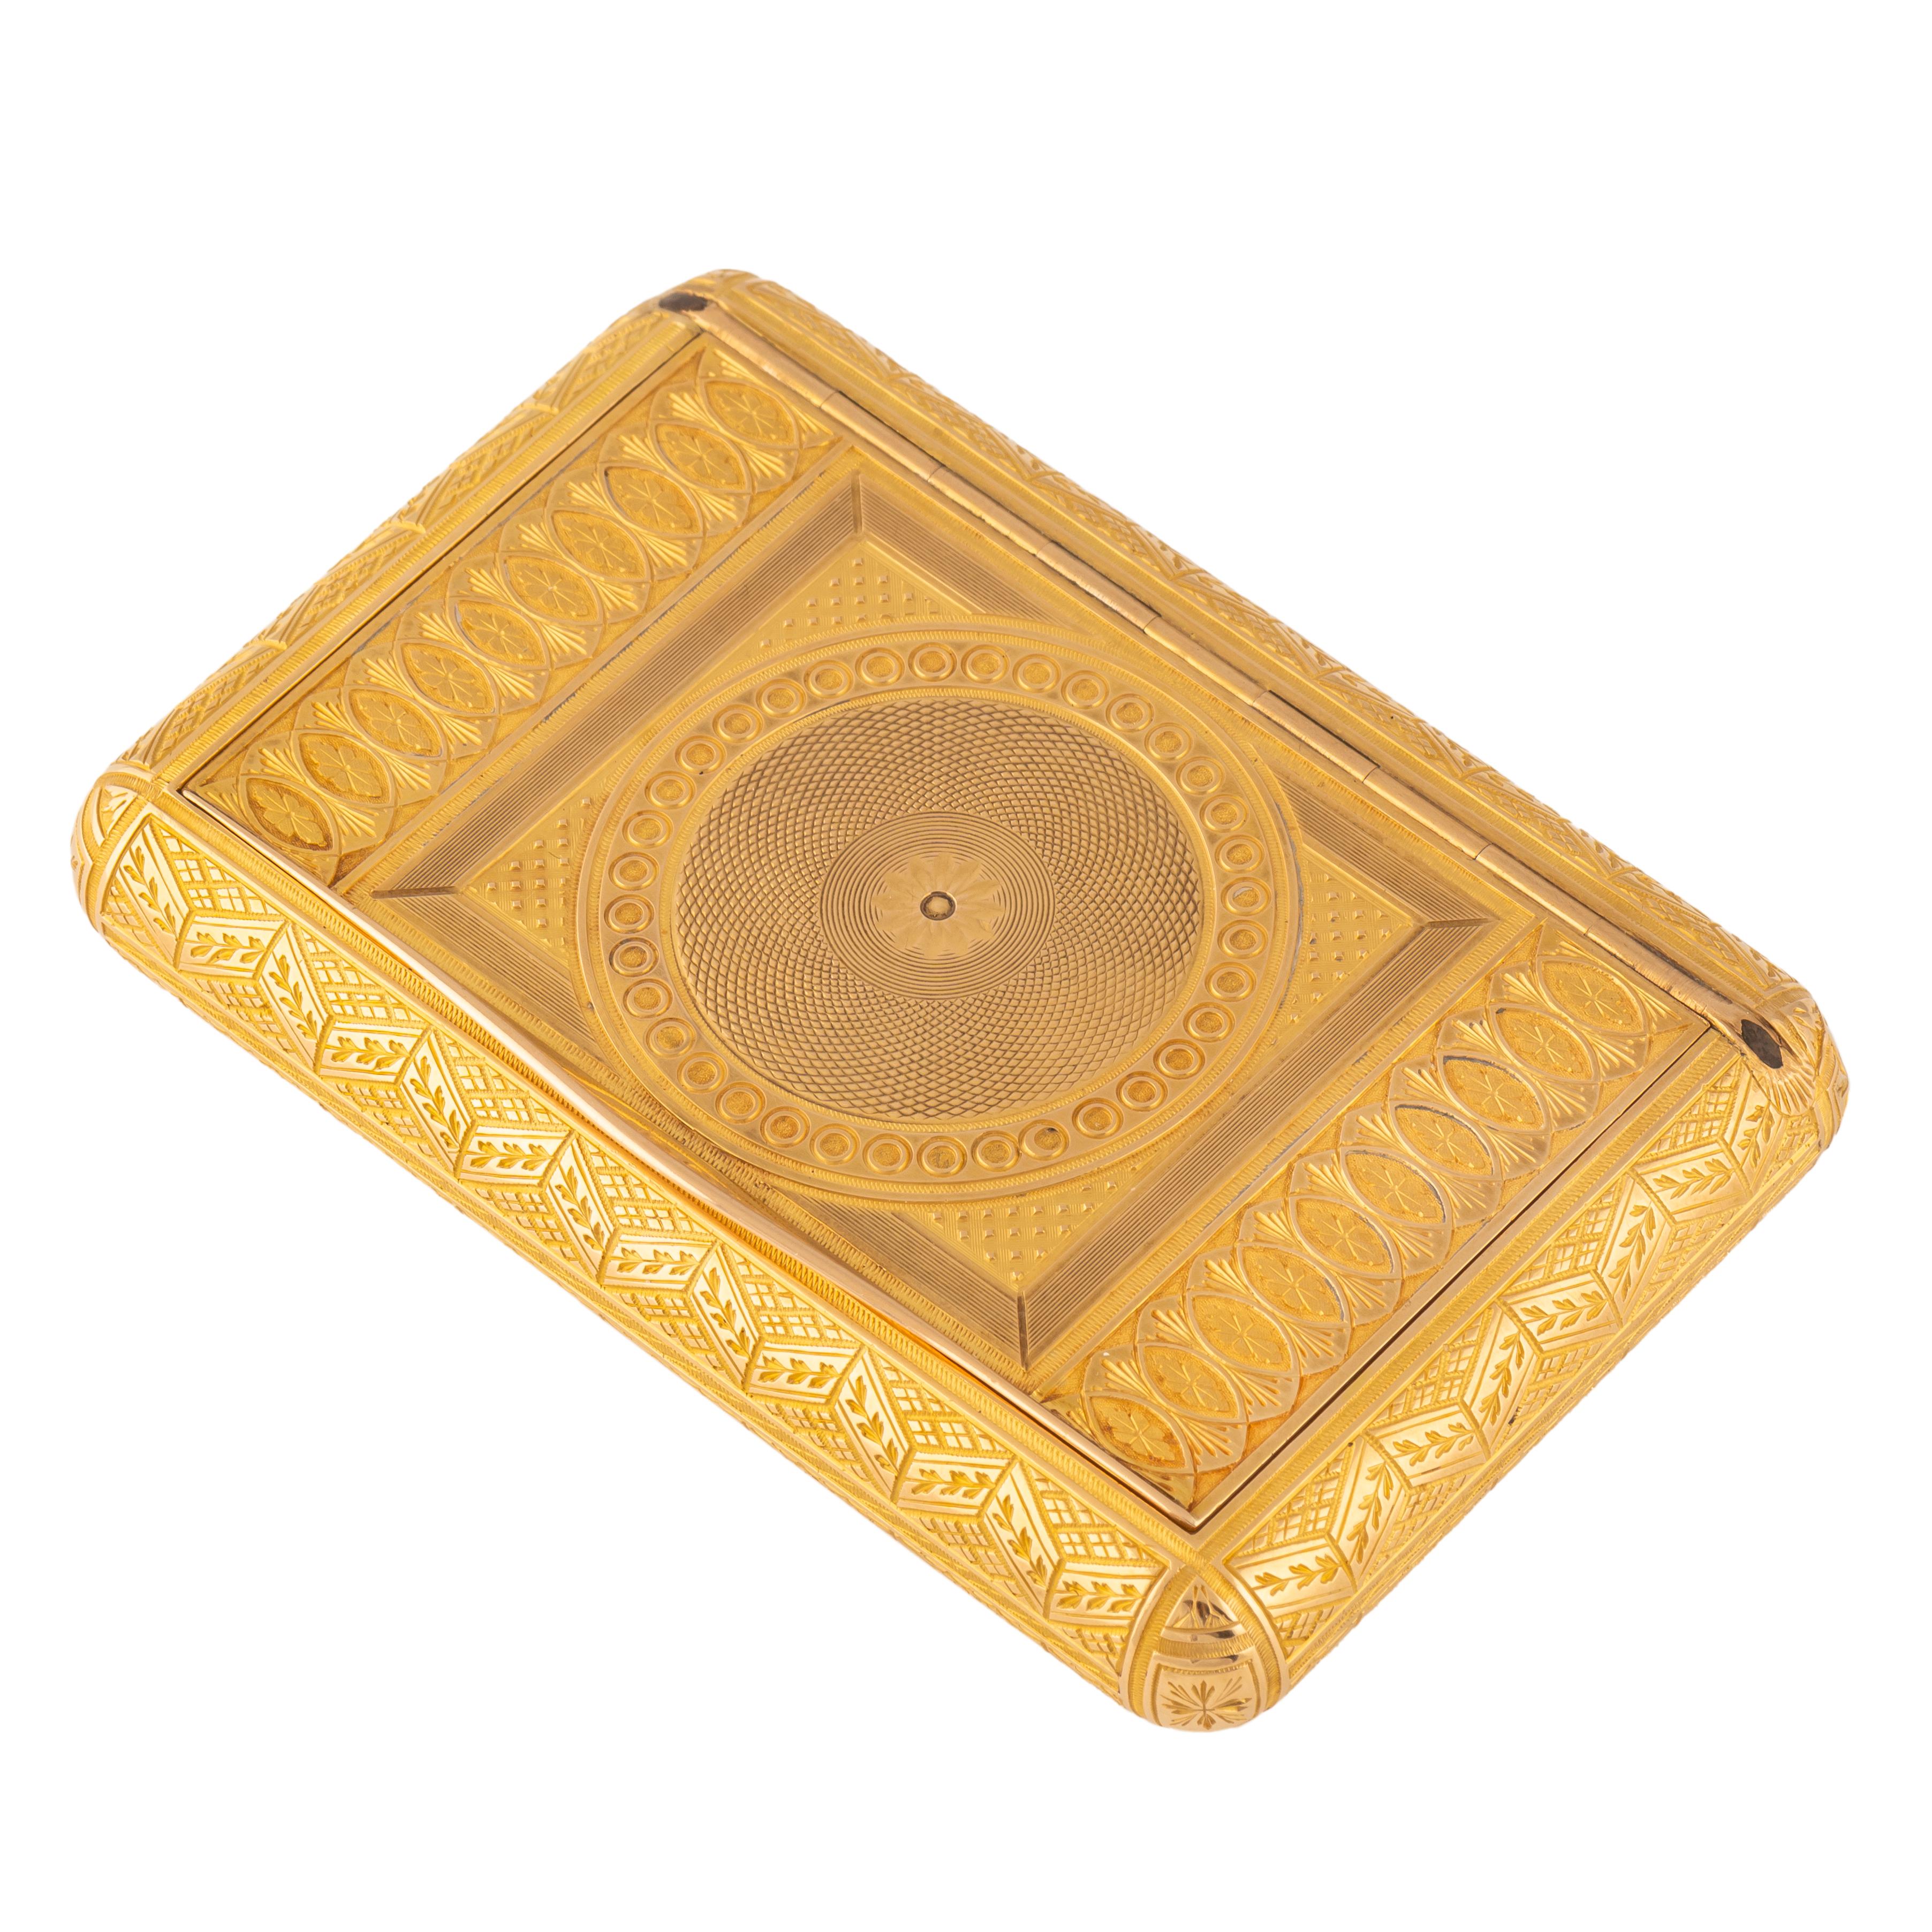 This rare Russian gold snuff box was created during the period of Tsar Alexander I (1801-1825) by one of the most prominent Russian imperial goldsmiths working in the imperial capital of St. Petersburg, Johanne Wilhelm Keibel.

Rectangular with